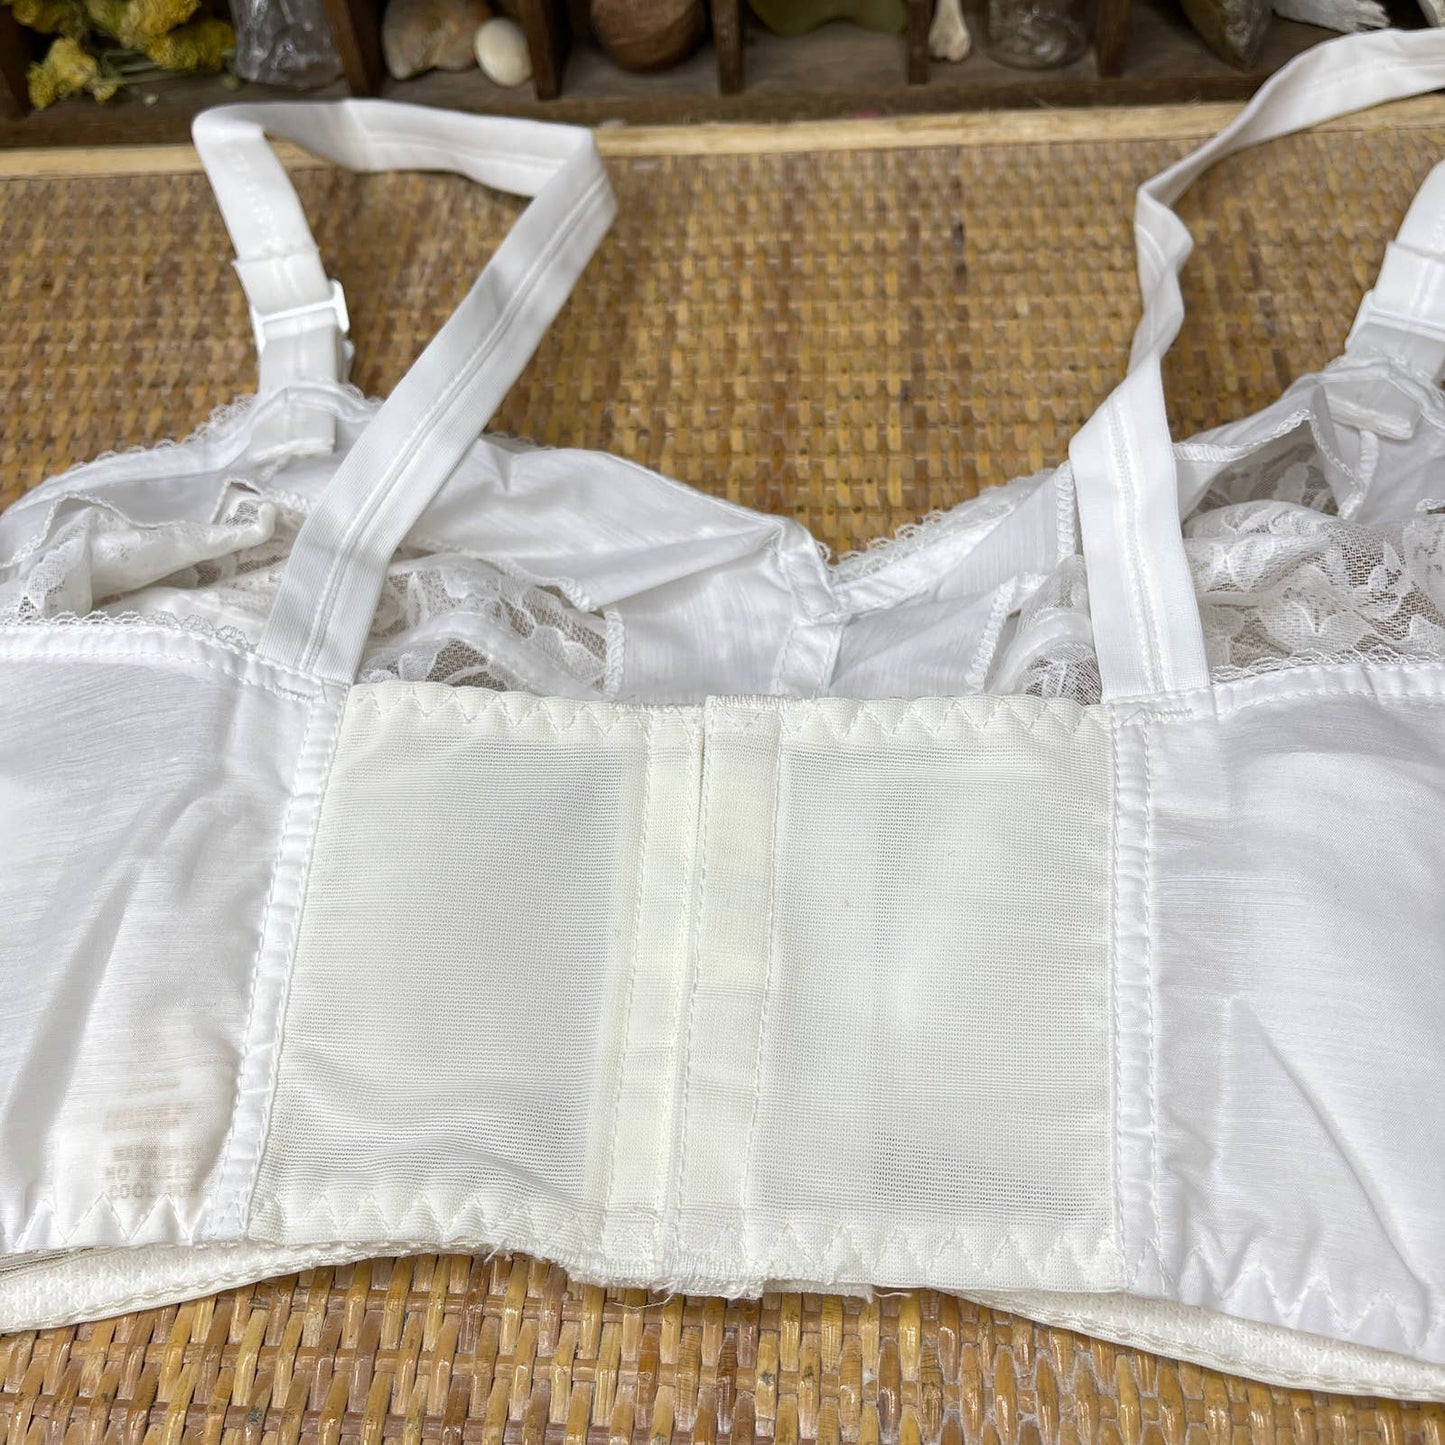 Vintage 60s White Lace Bullet Bra with Embroidered Flower by Figurettes Size 42E